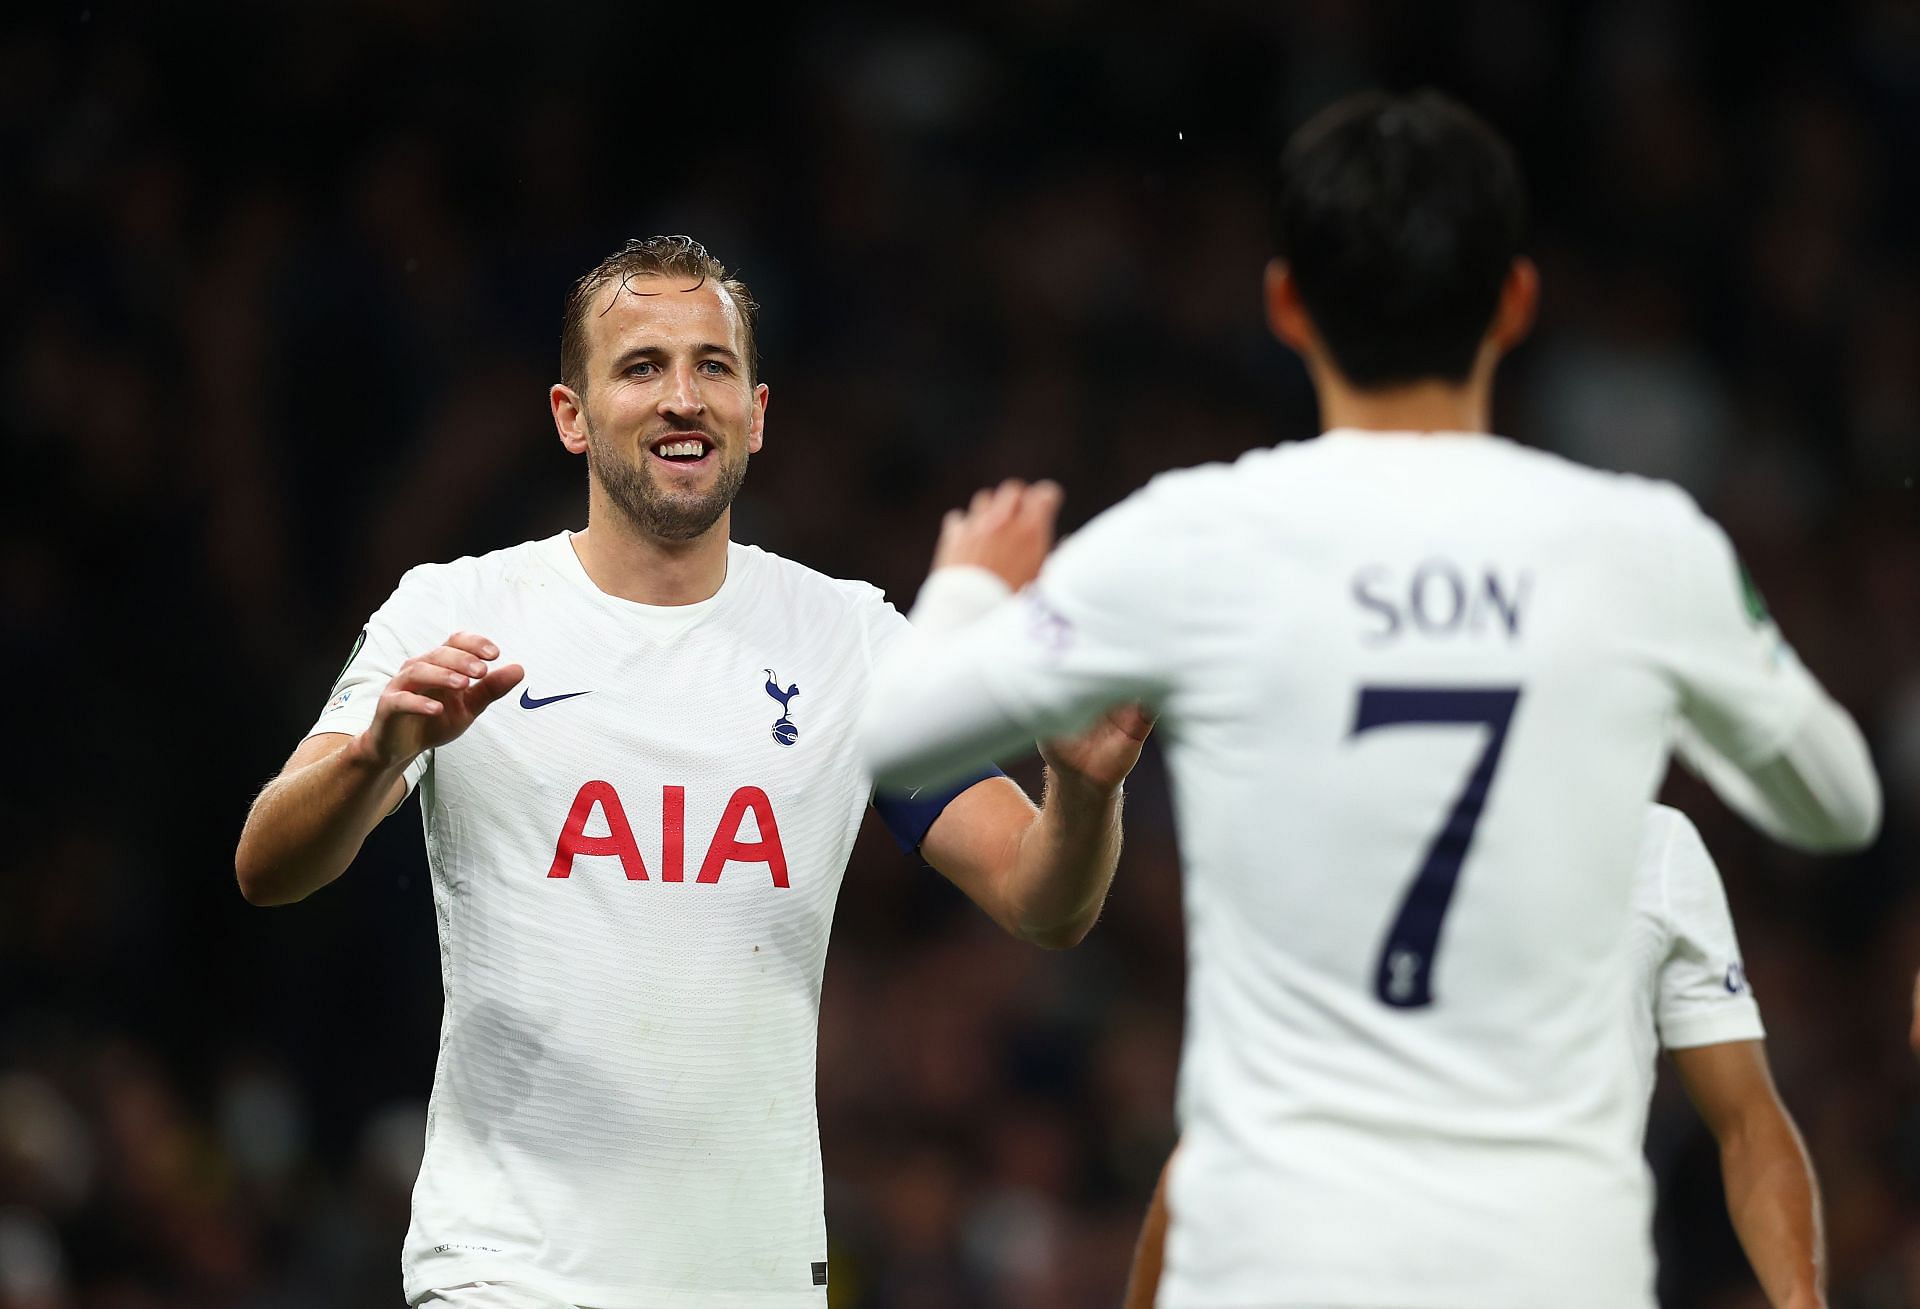 Harry Kane (L) and Son Heung-min combined to lead Tottenham Hotspur past the Gunners